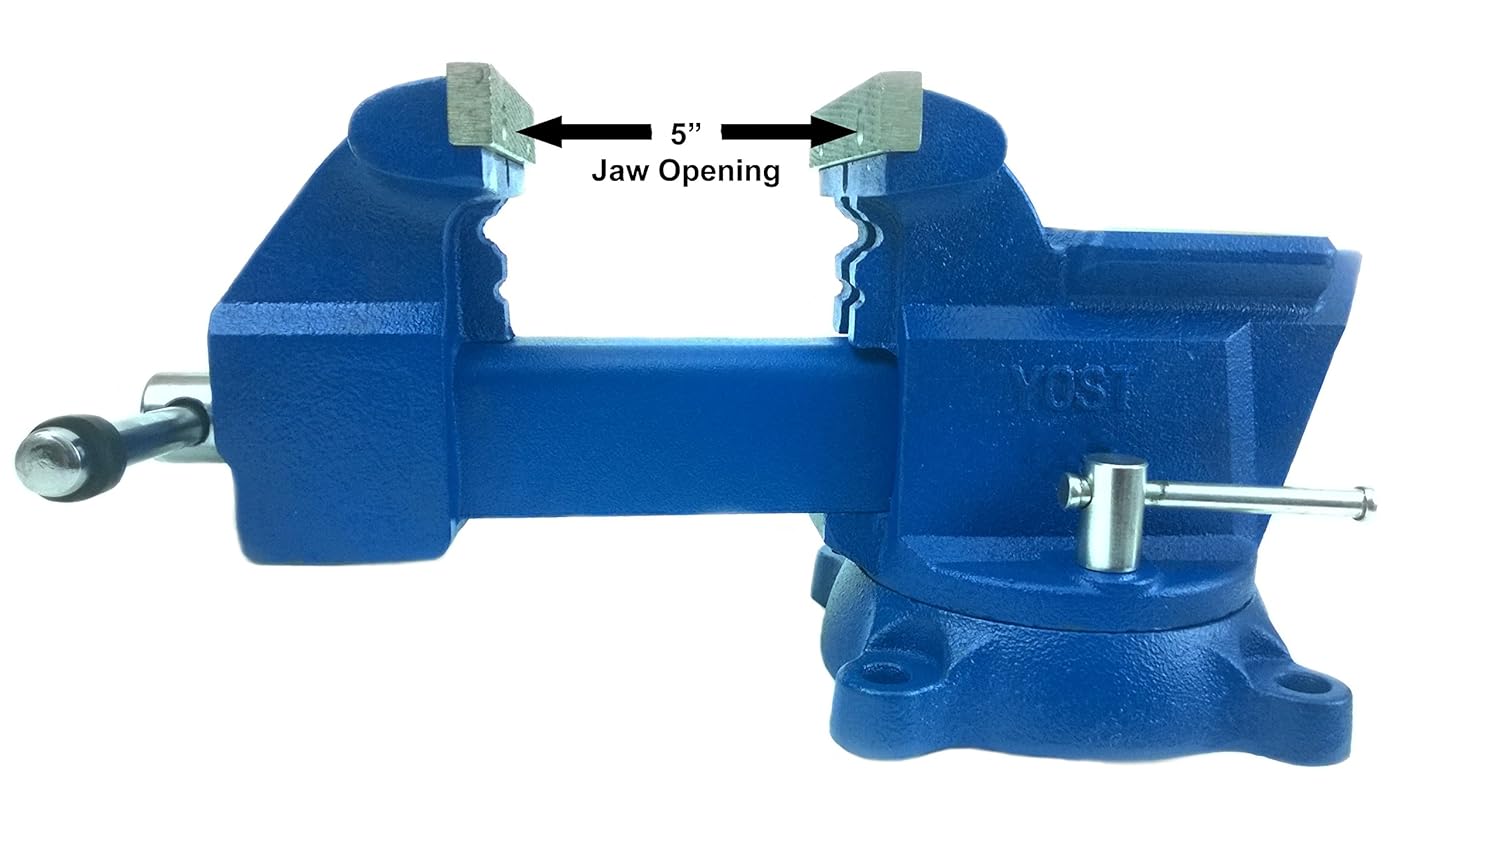 Generic Yost Vises 455 5.5" Heavy-Duty Utility Combination Pipe and Bench Vise, Blue